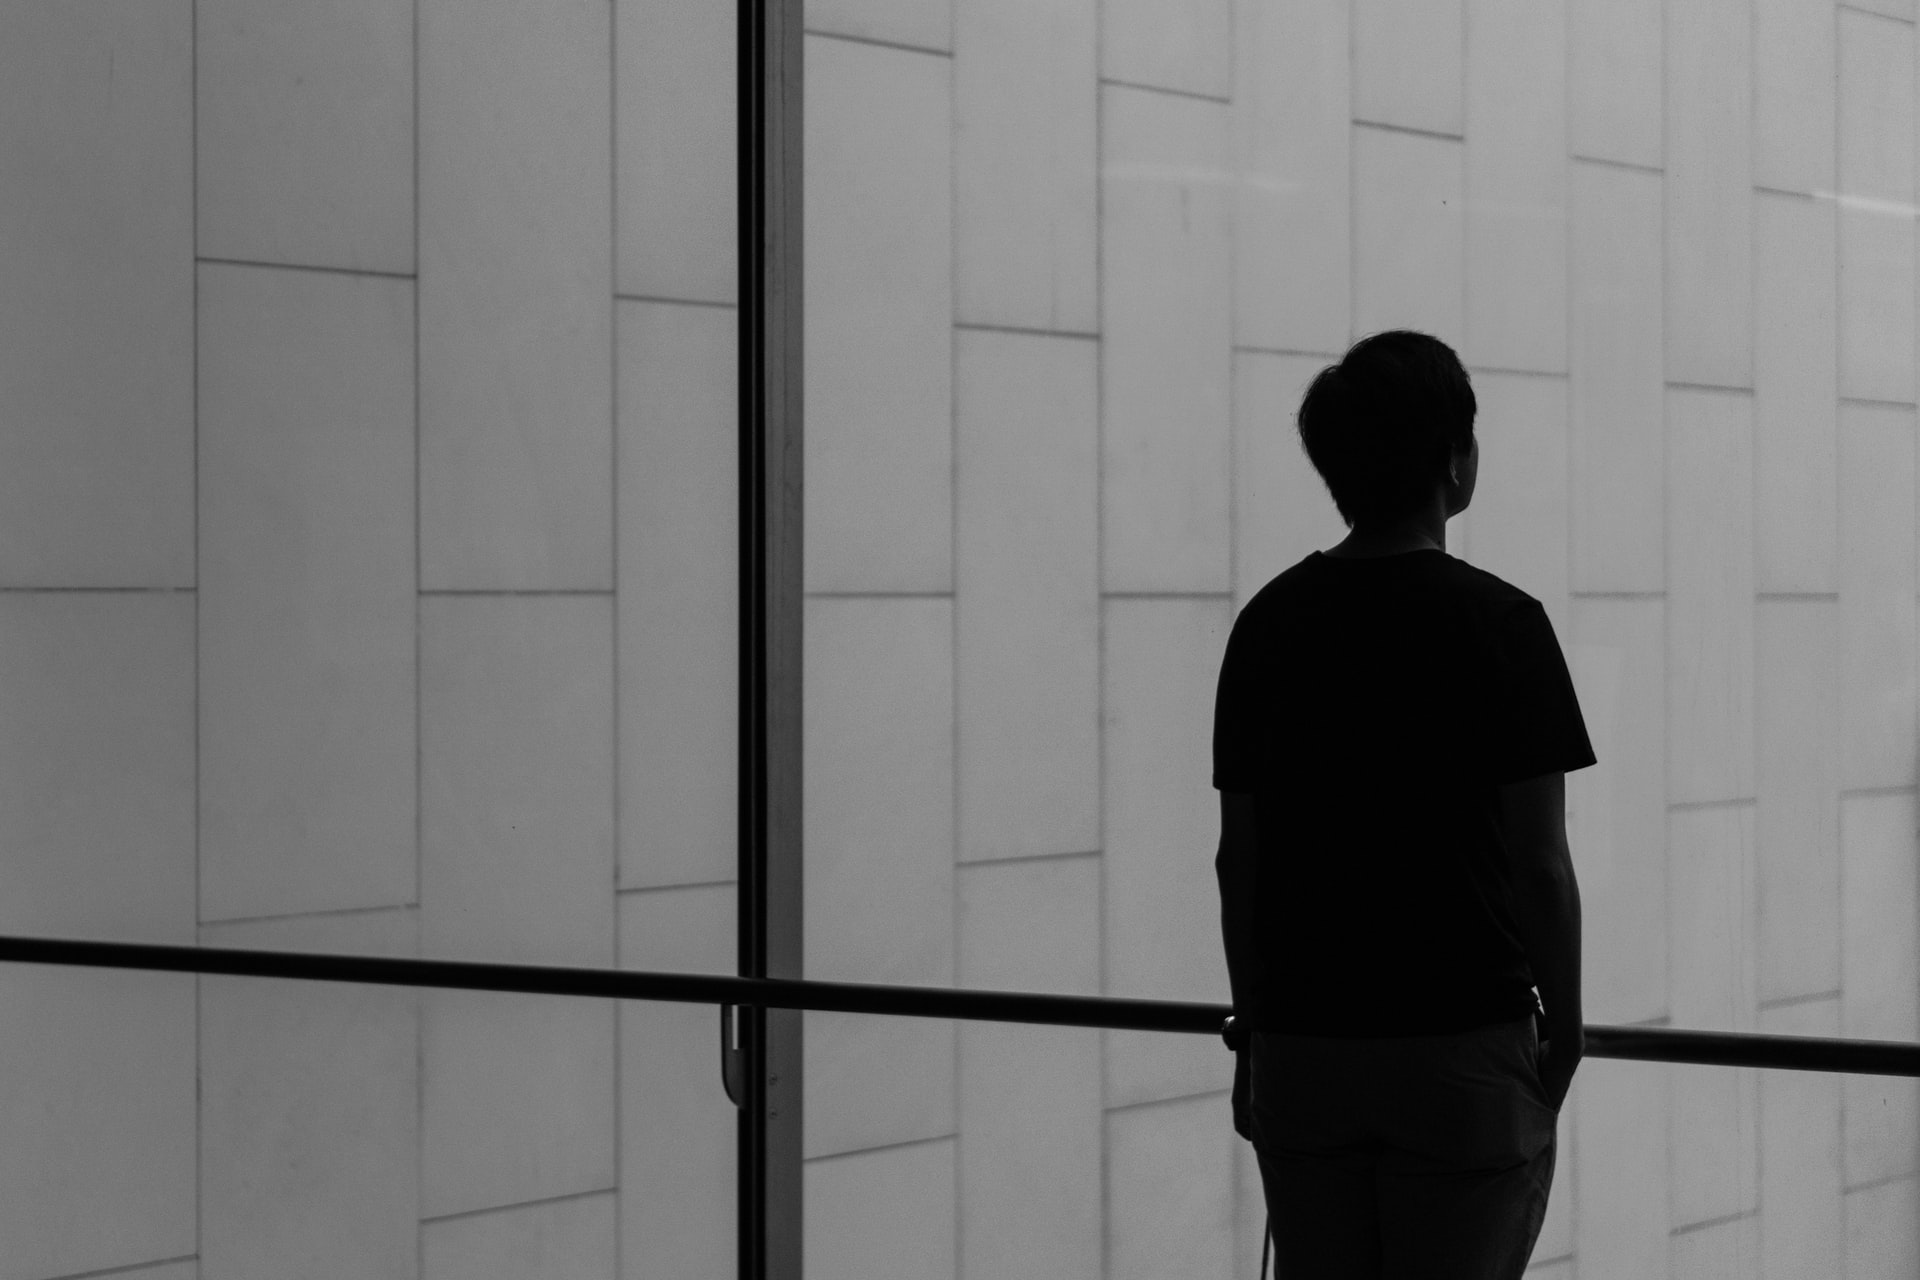 Silhouette of a person standing in front of a window